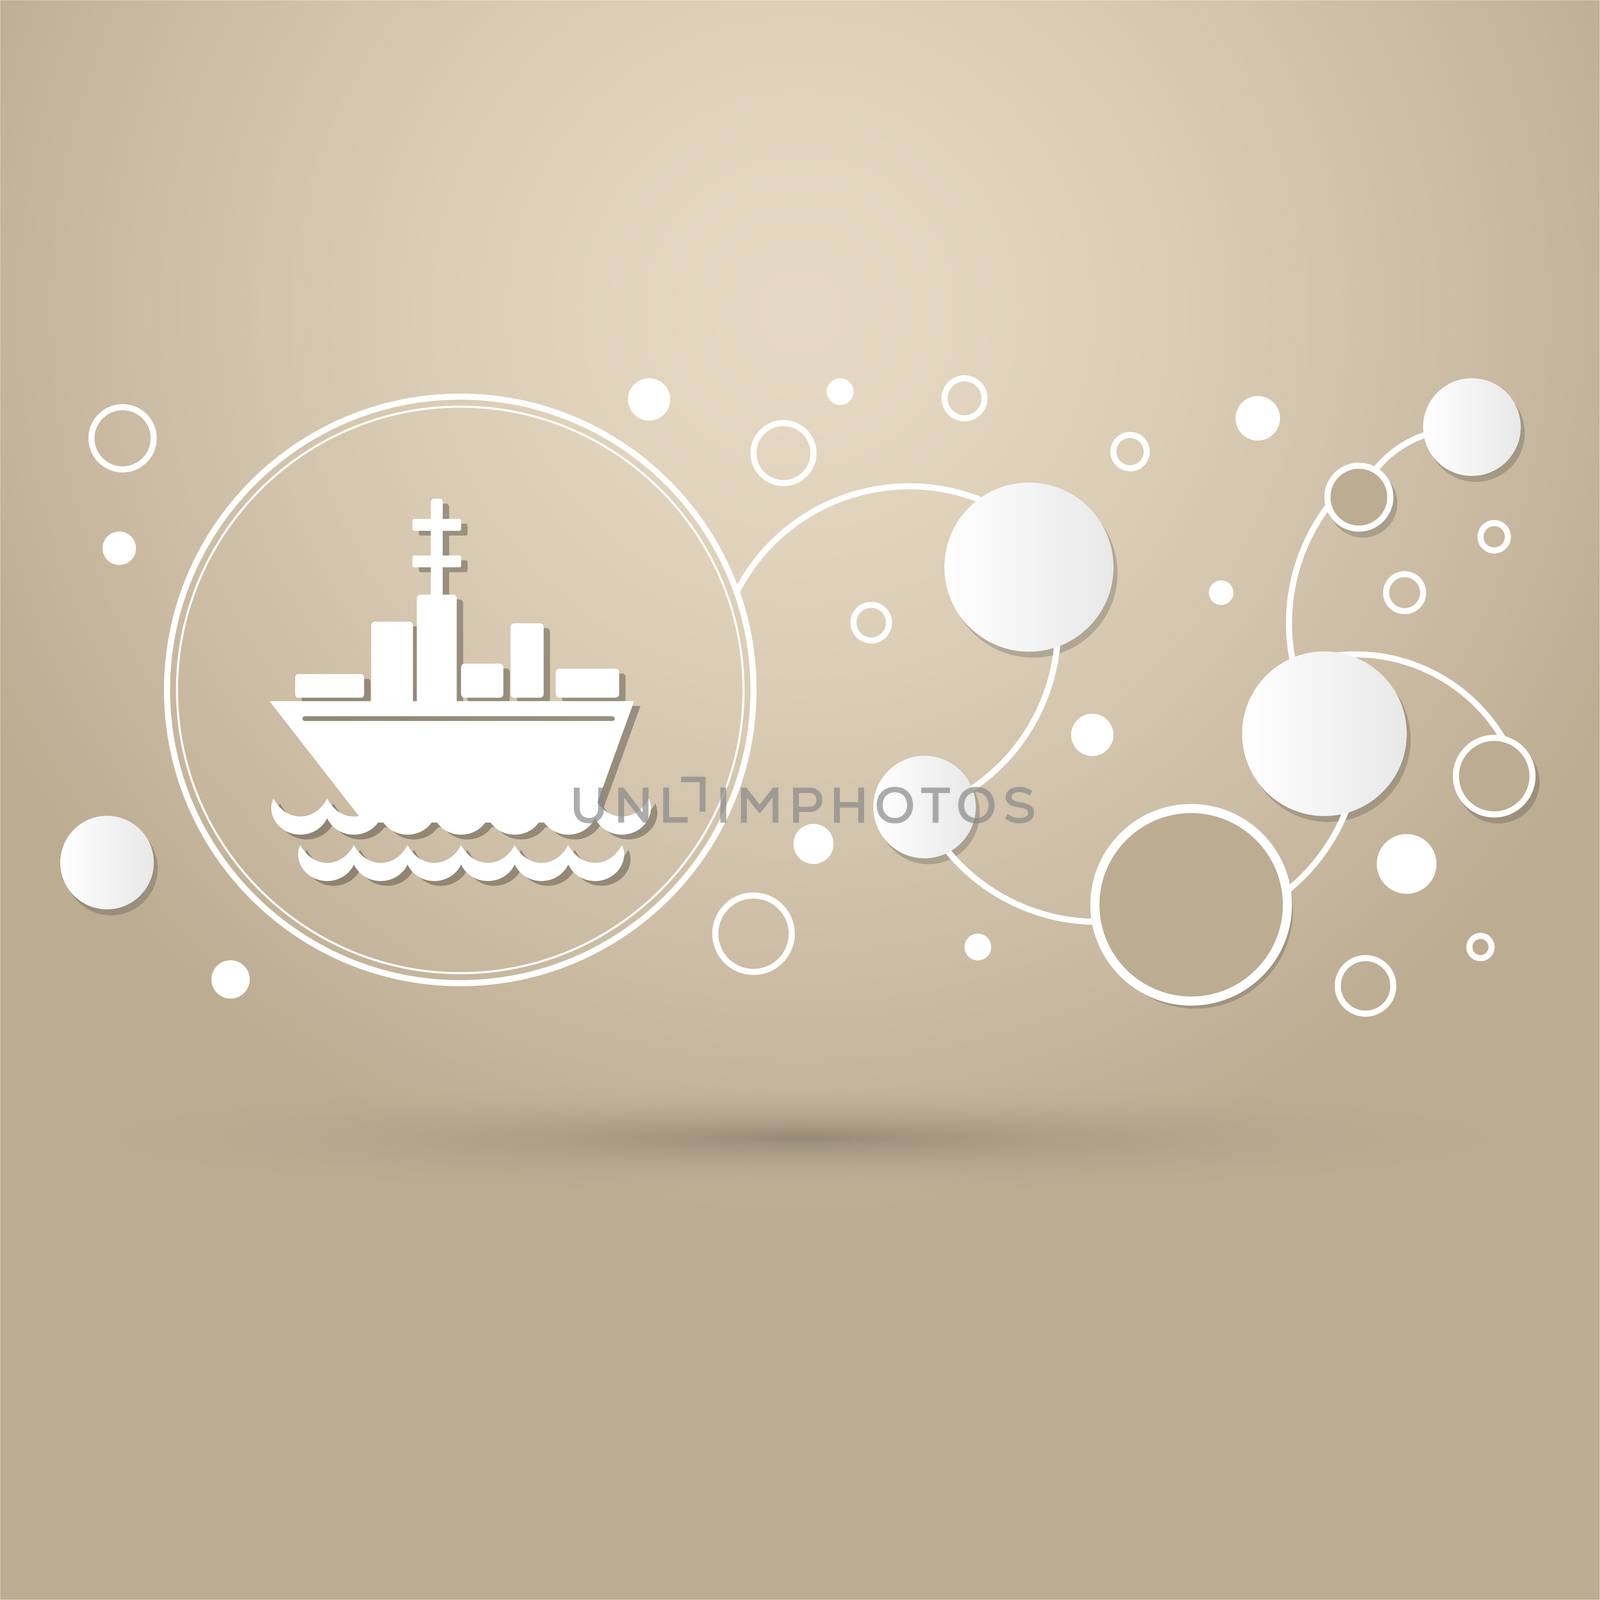 Ship boat icon on a brown background with elegant style and modern design infographic. illustration